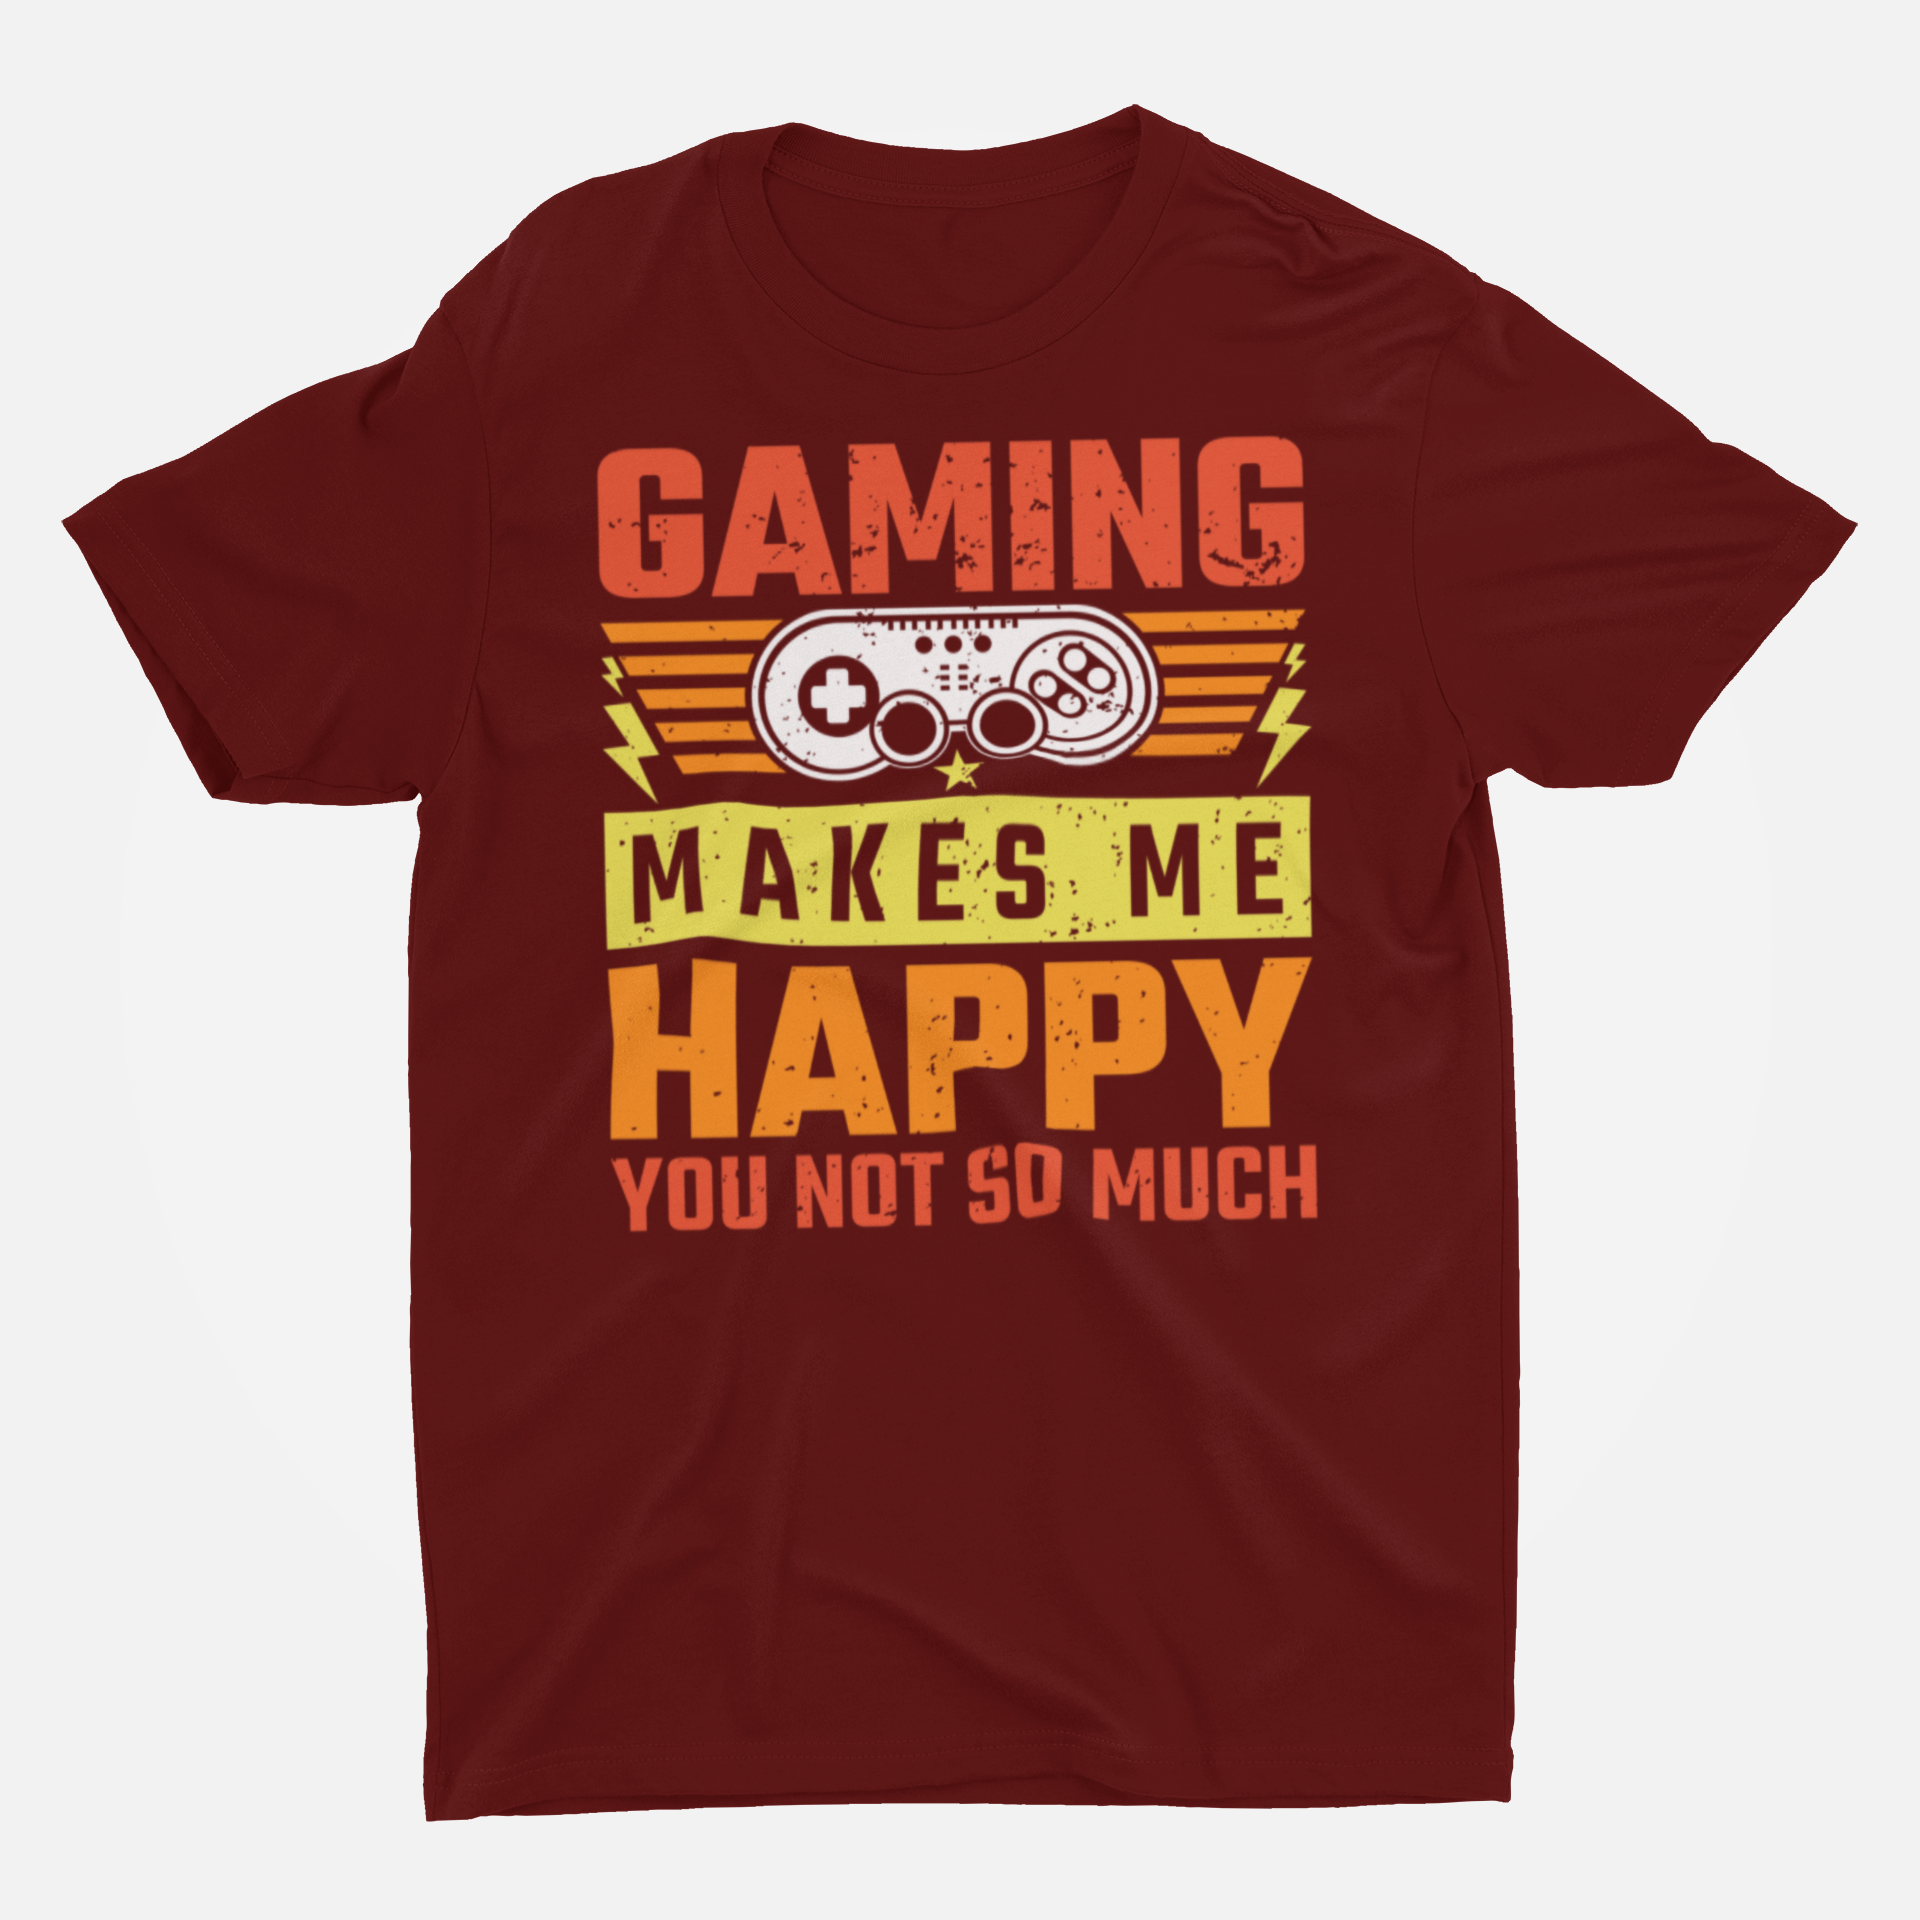 Gaming Makes Me Happy Marron Round Neck T-Shirt for Men